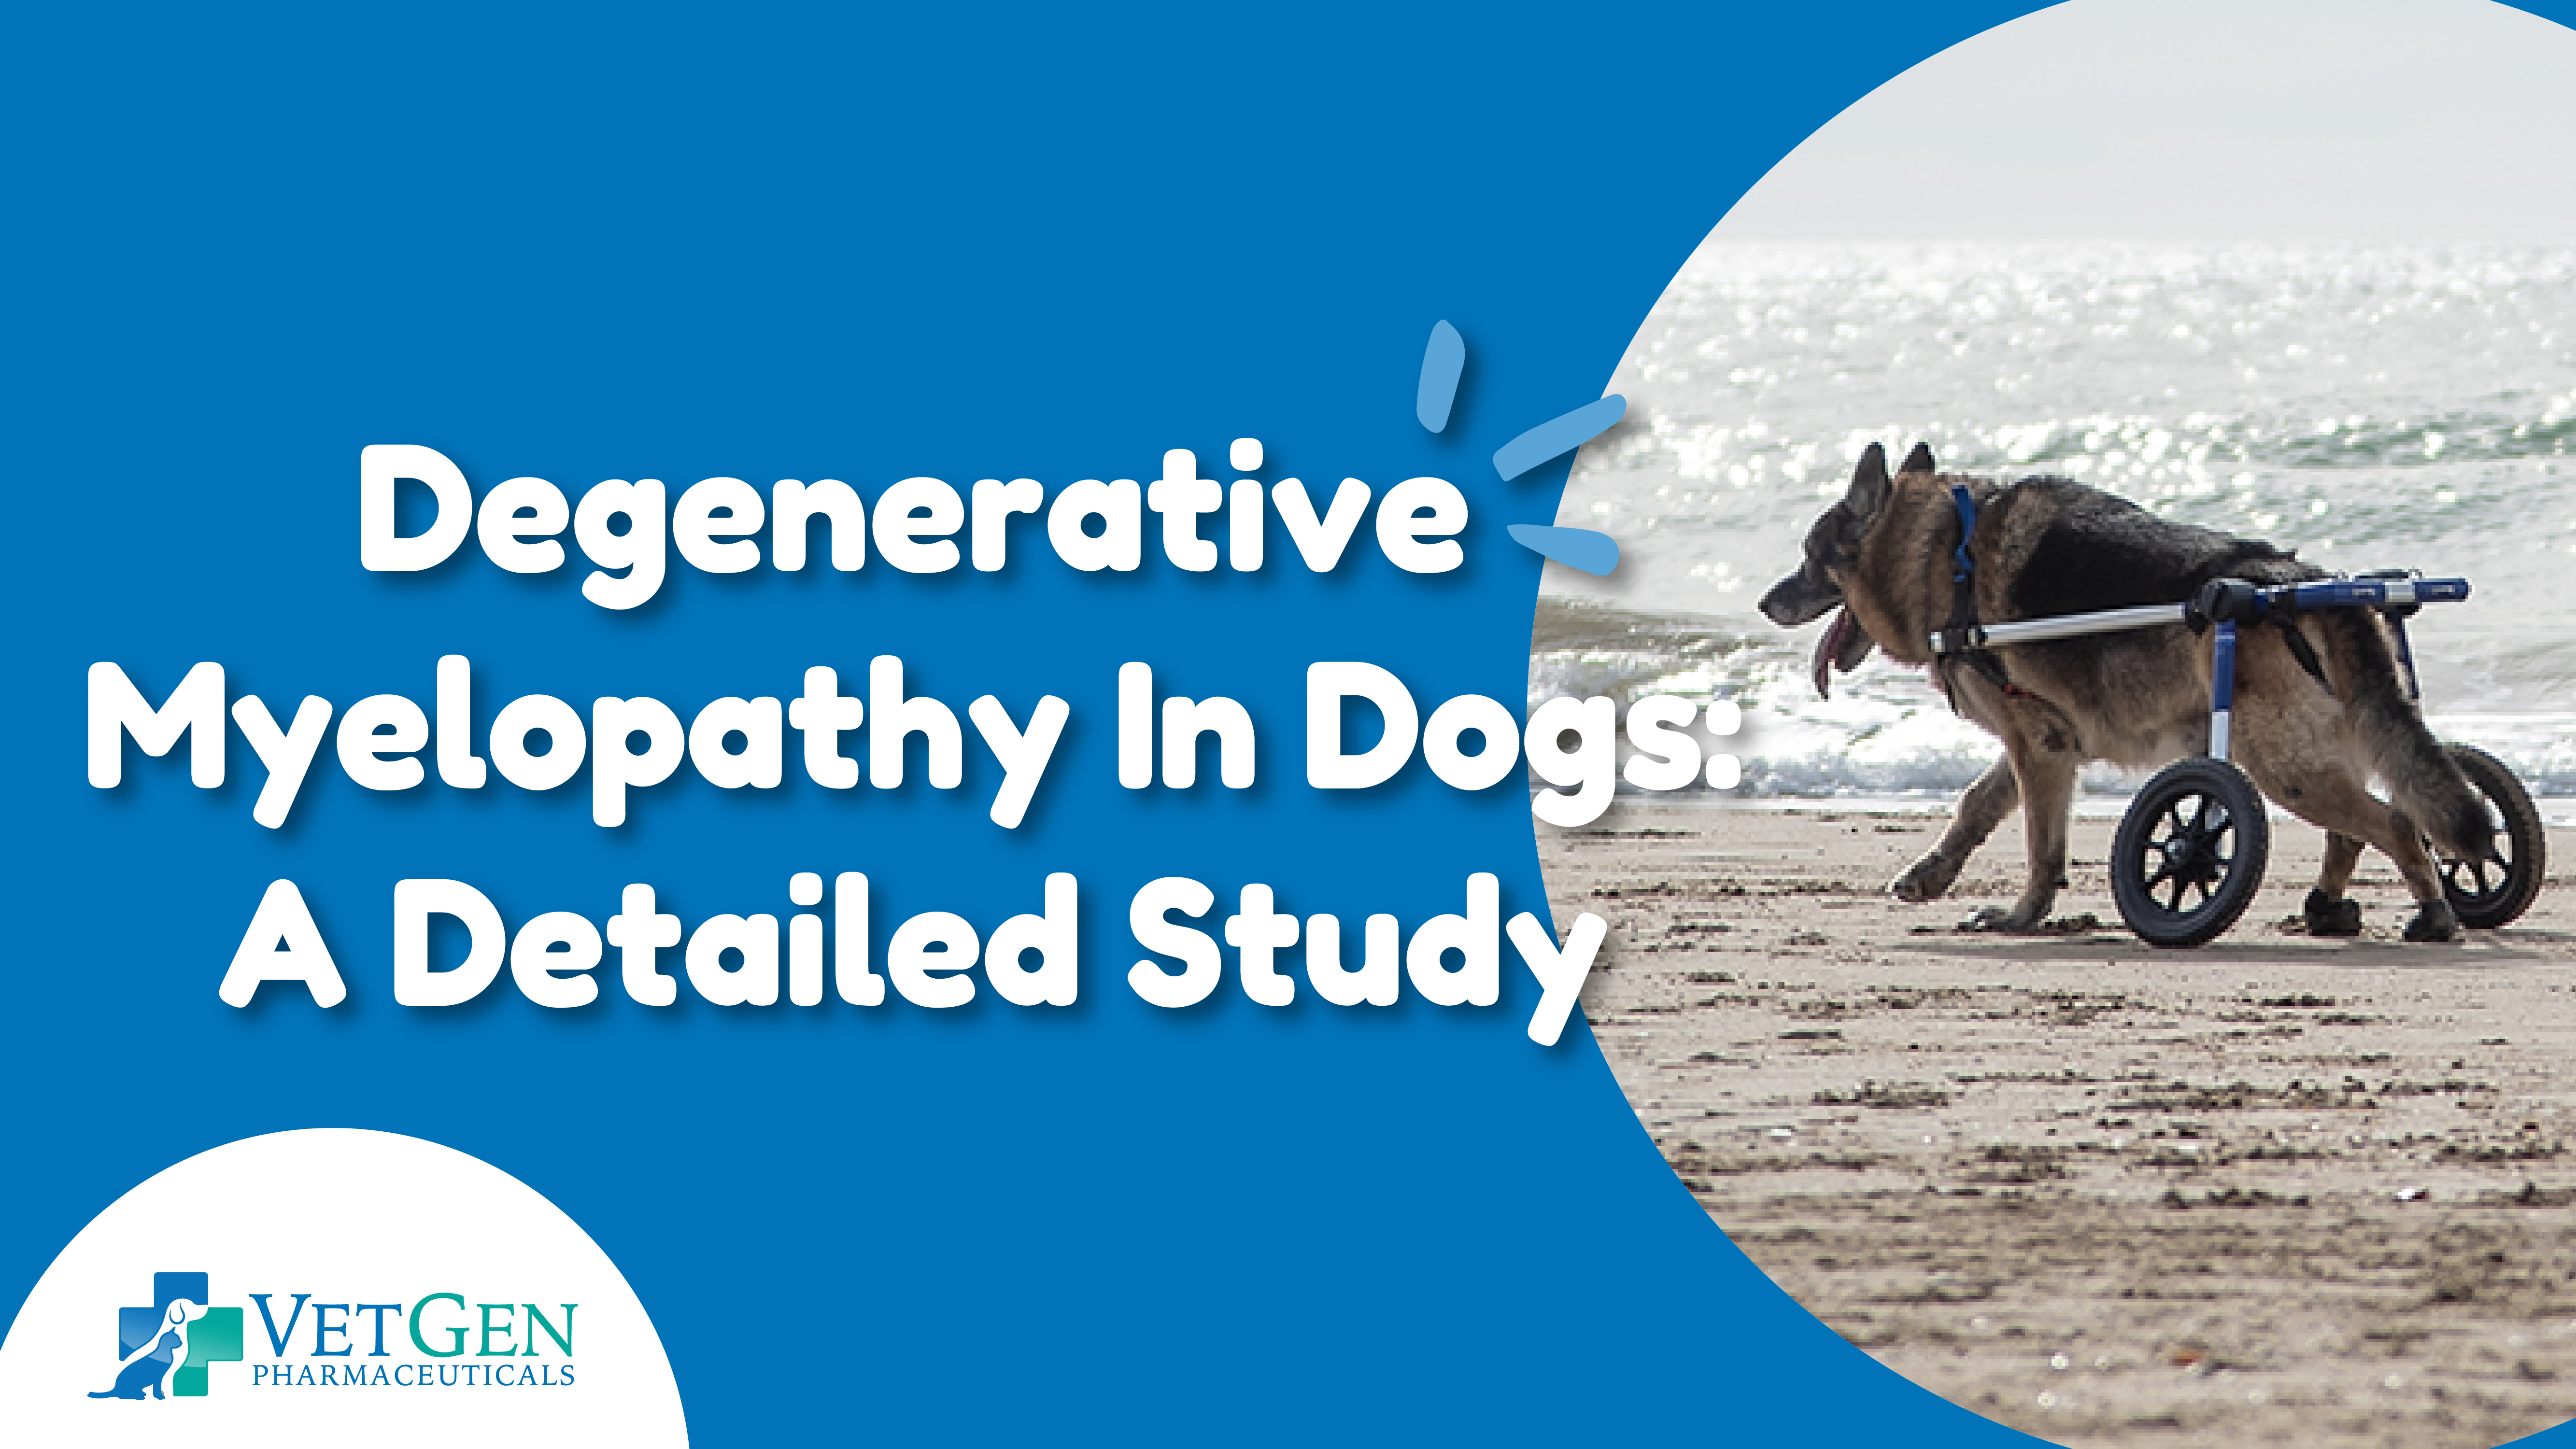 Degenerative Myelopathy In Dogs- A Detailed Study